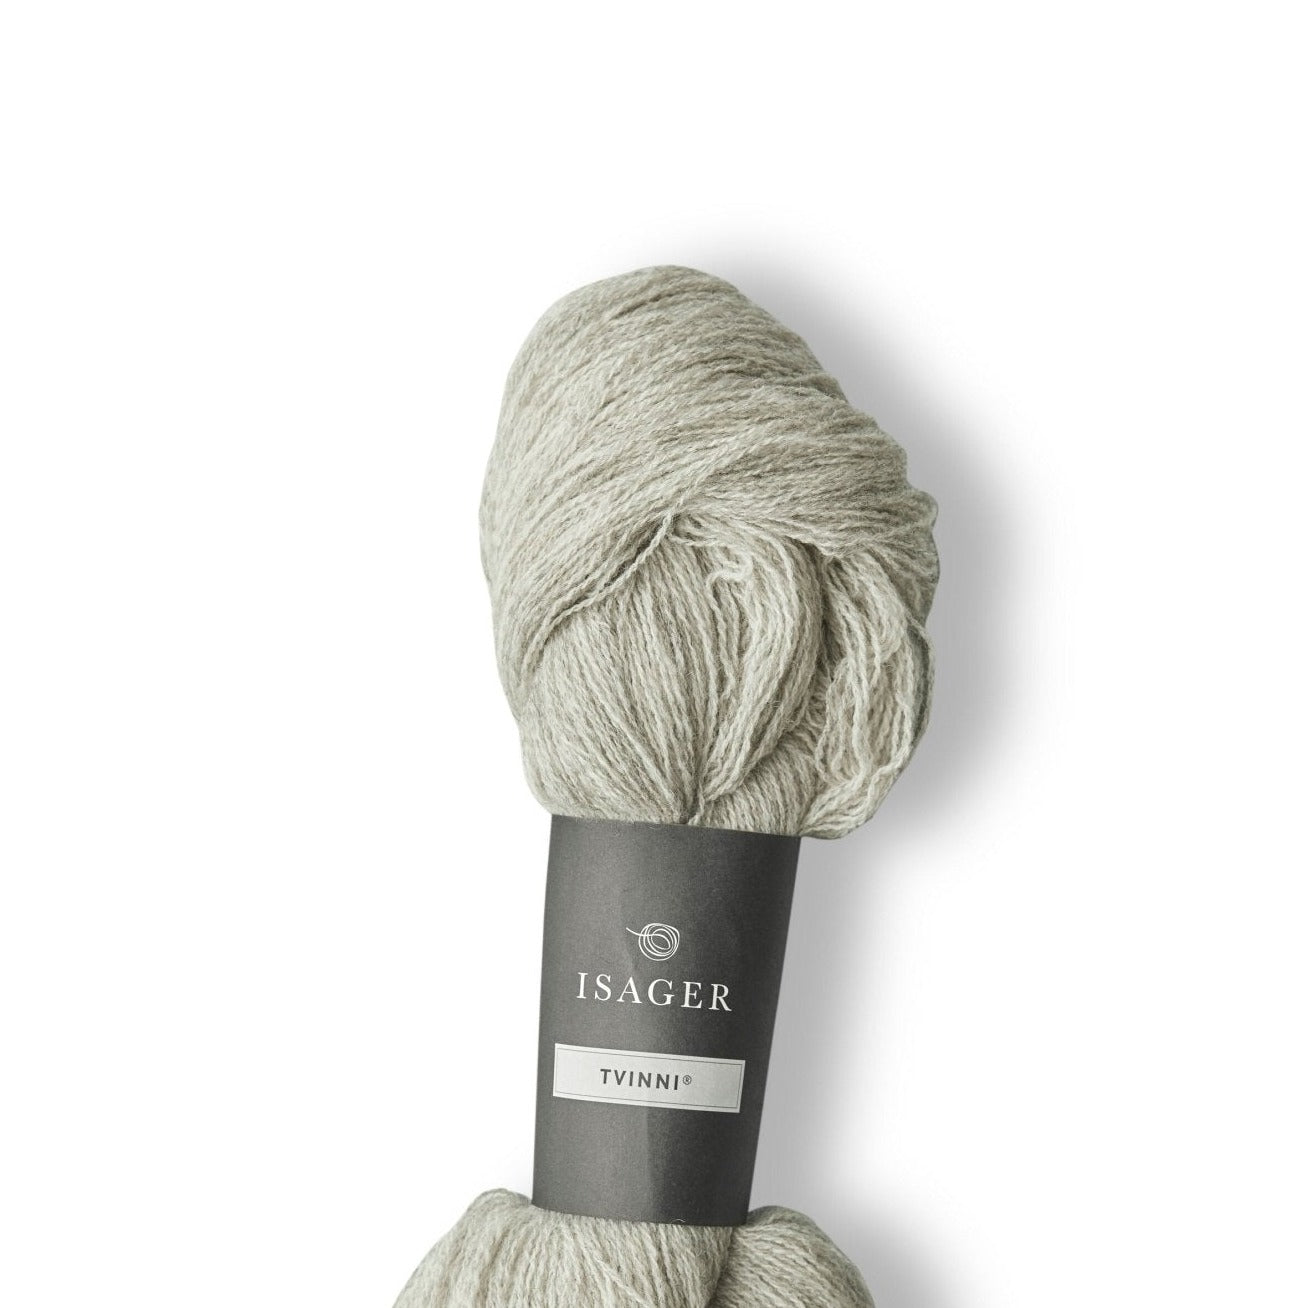 Isager Tvinni - 2s - 4 Ply - Isager - The Little Yarn Store